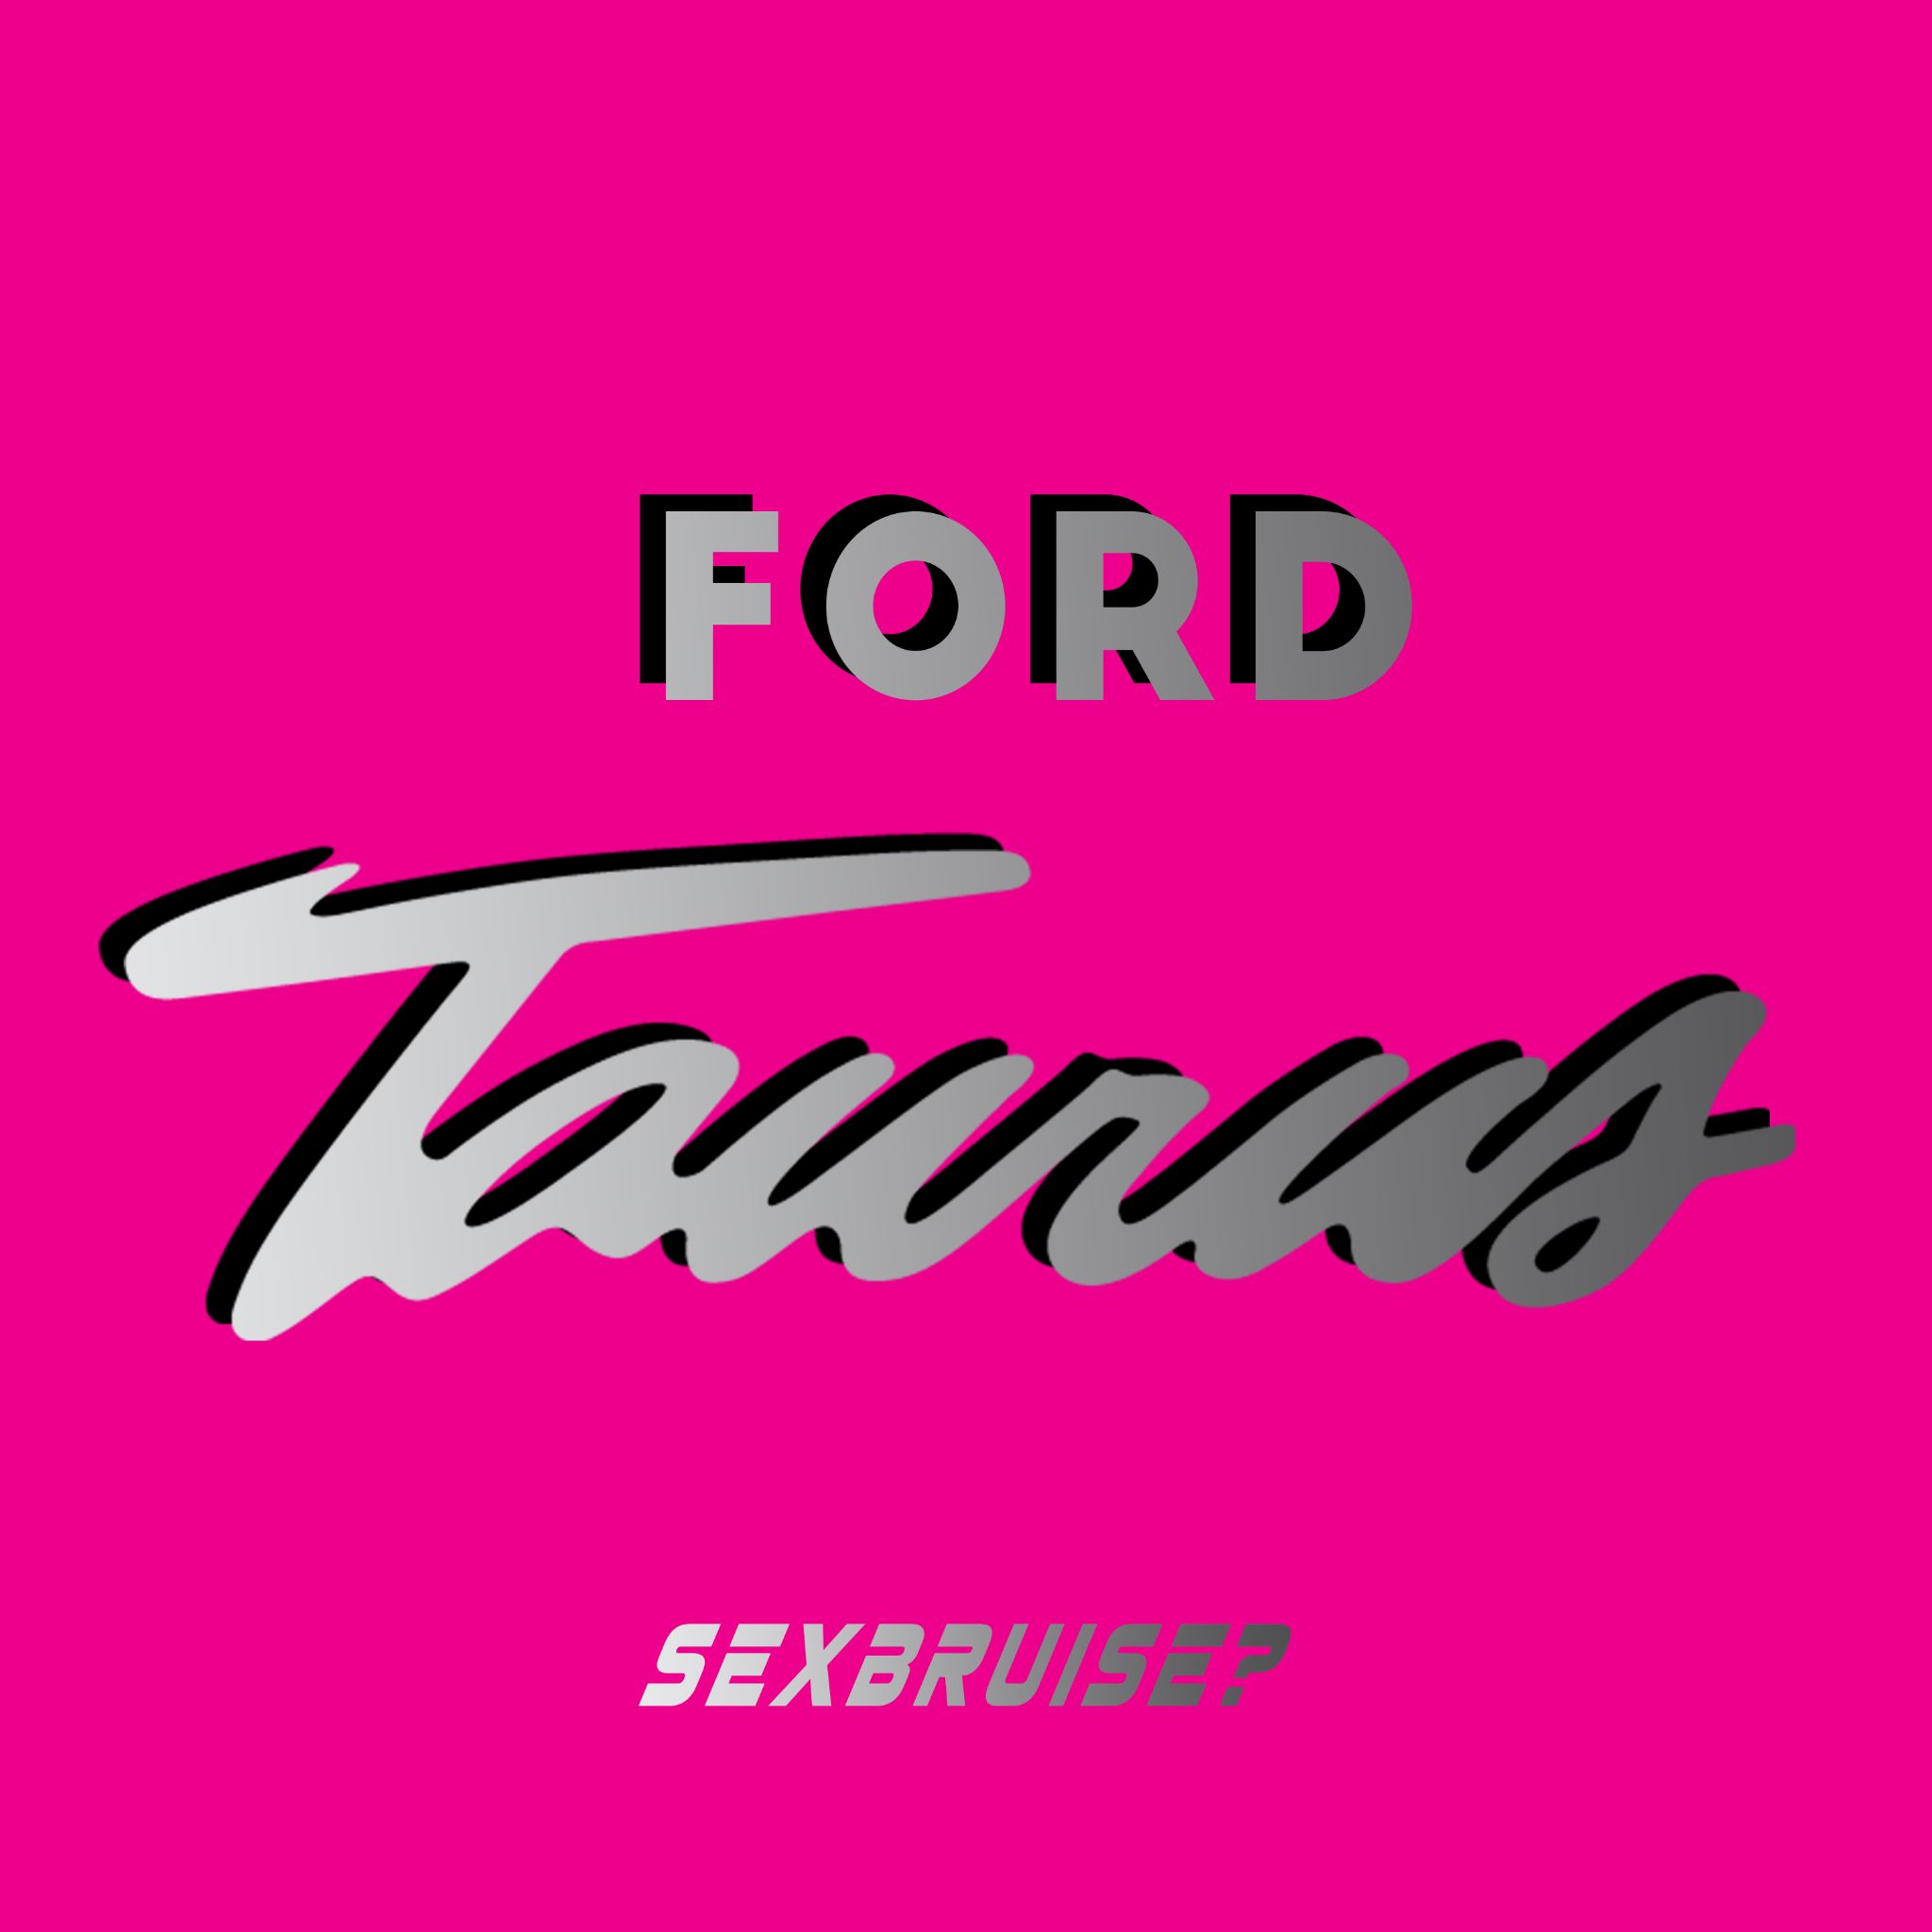 Sexbruise? Unveils “Ford Taurus” Single and Music Video